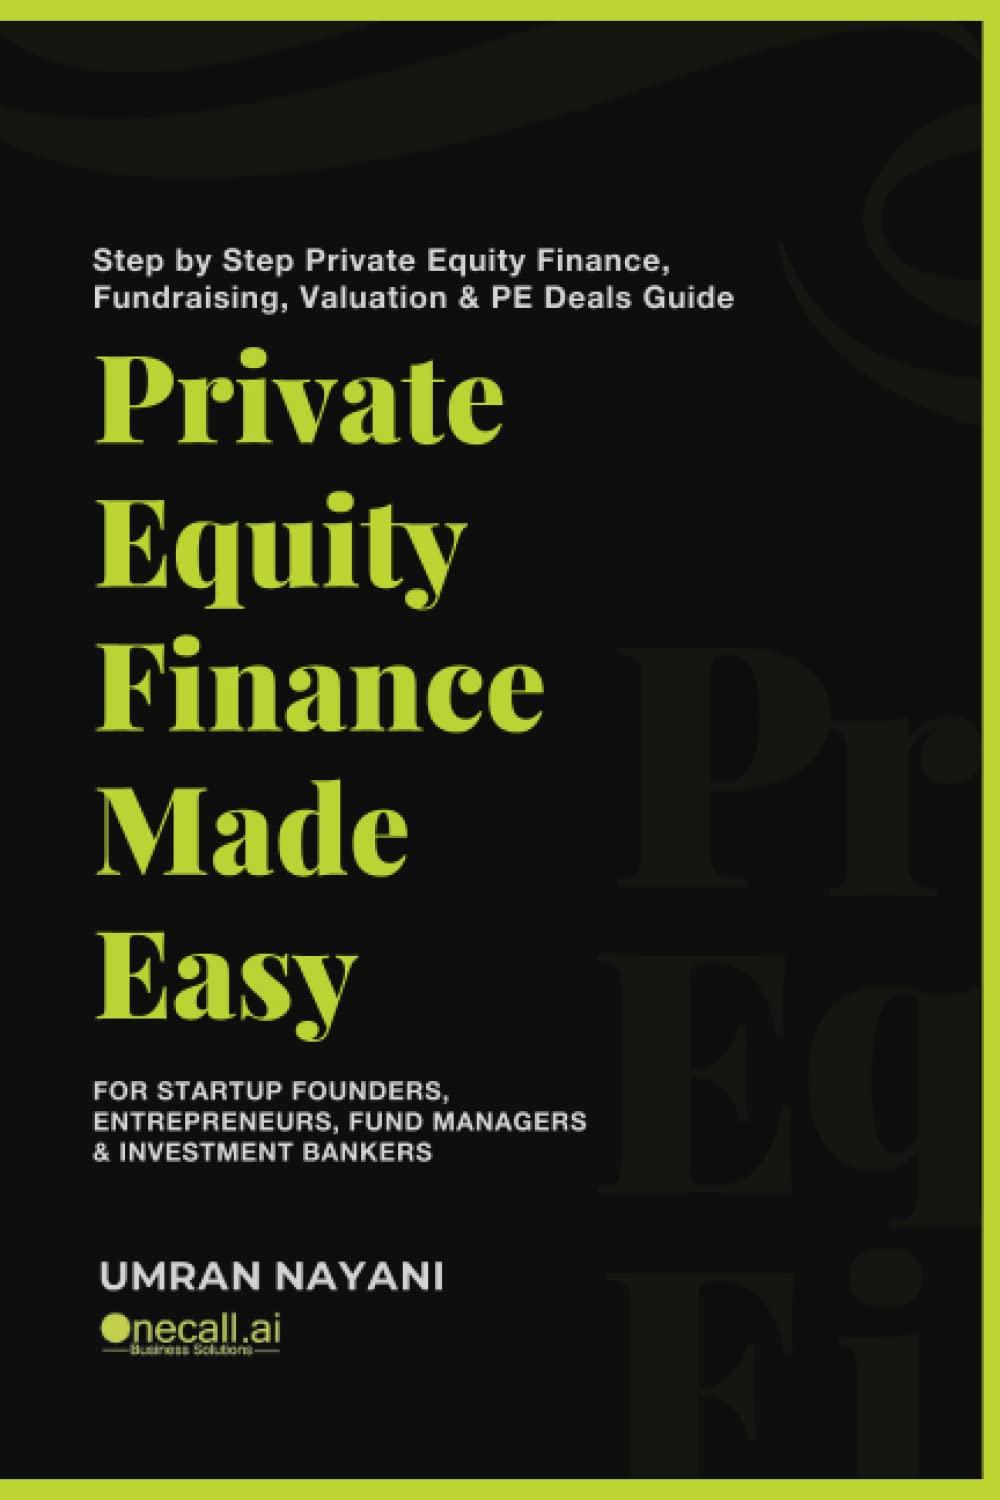 private equity finance made easy step by step private equity finance fundraising valuation and pe deals guide